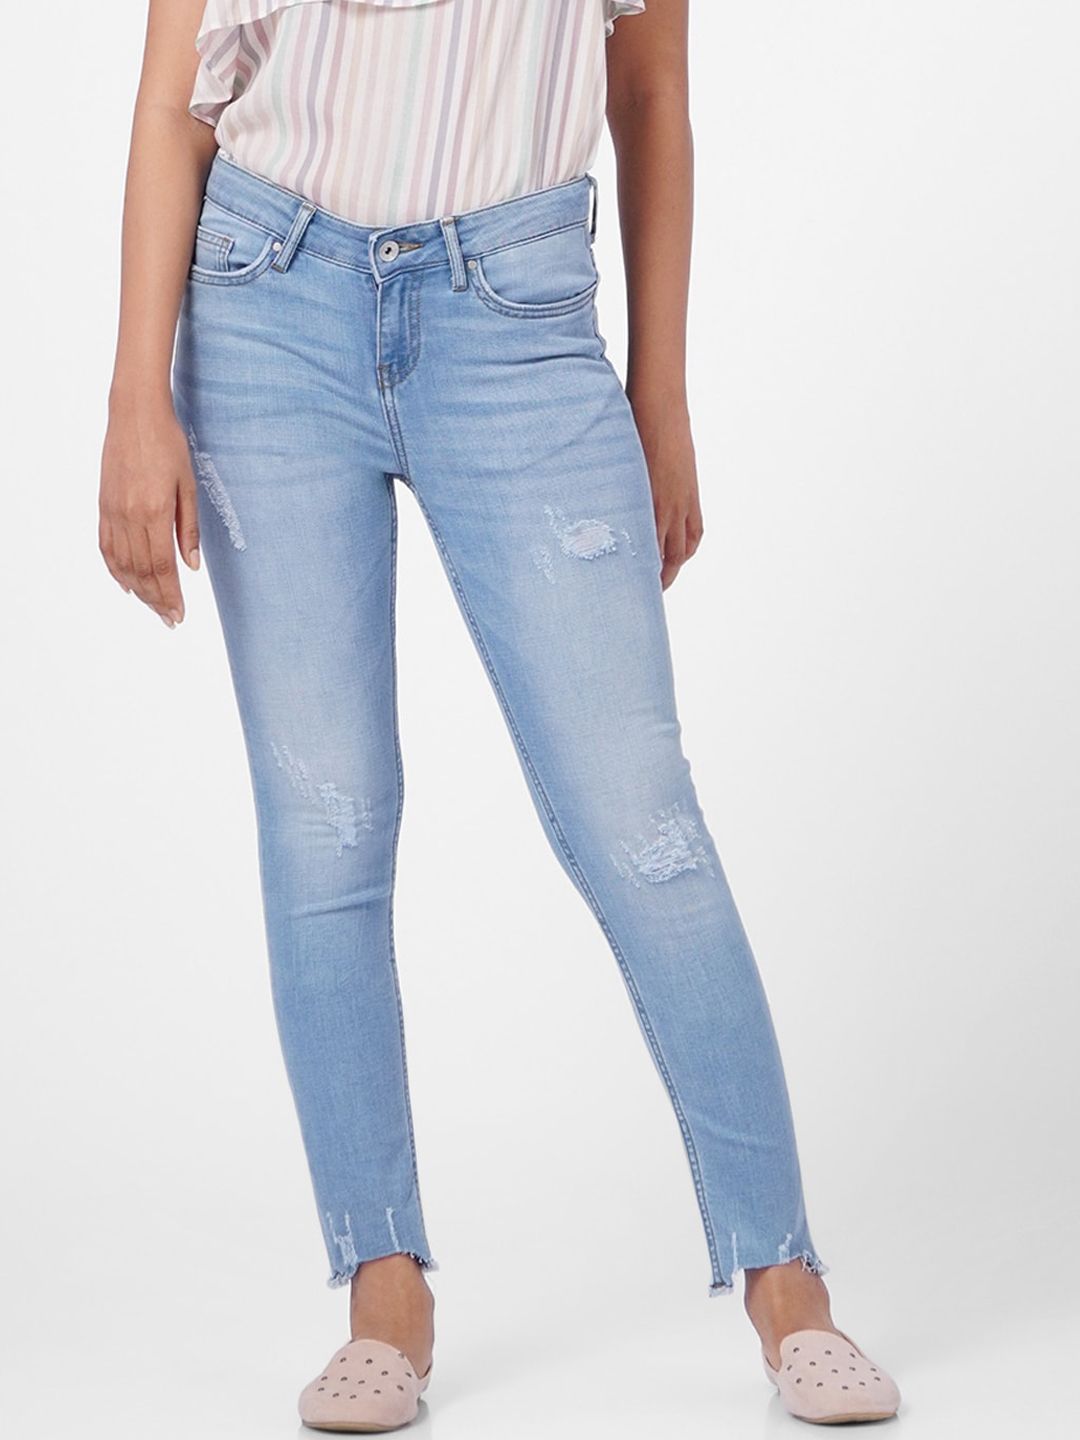 Vero Moda Women Blue Skinny Fit High-Rise Low Distress Light Fade Jeans Price in India